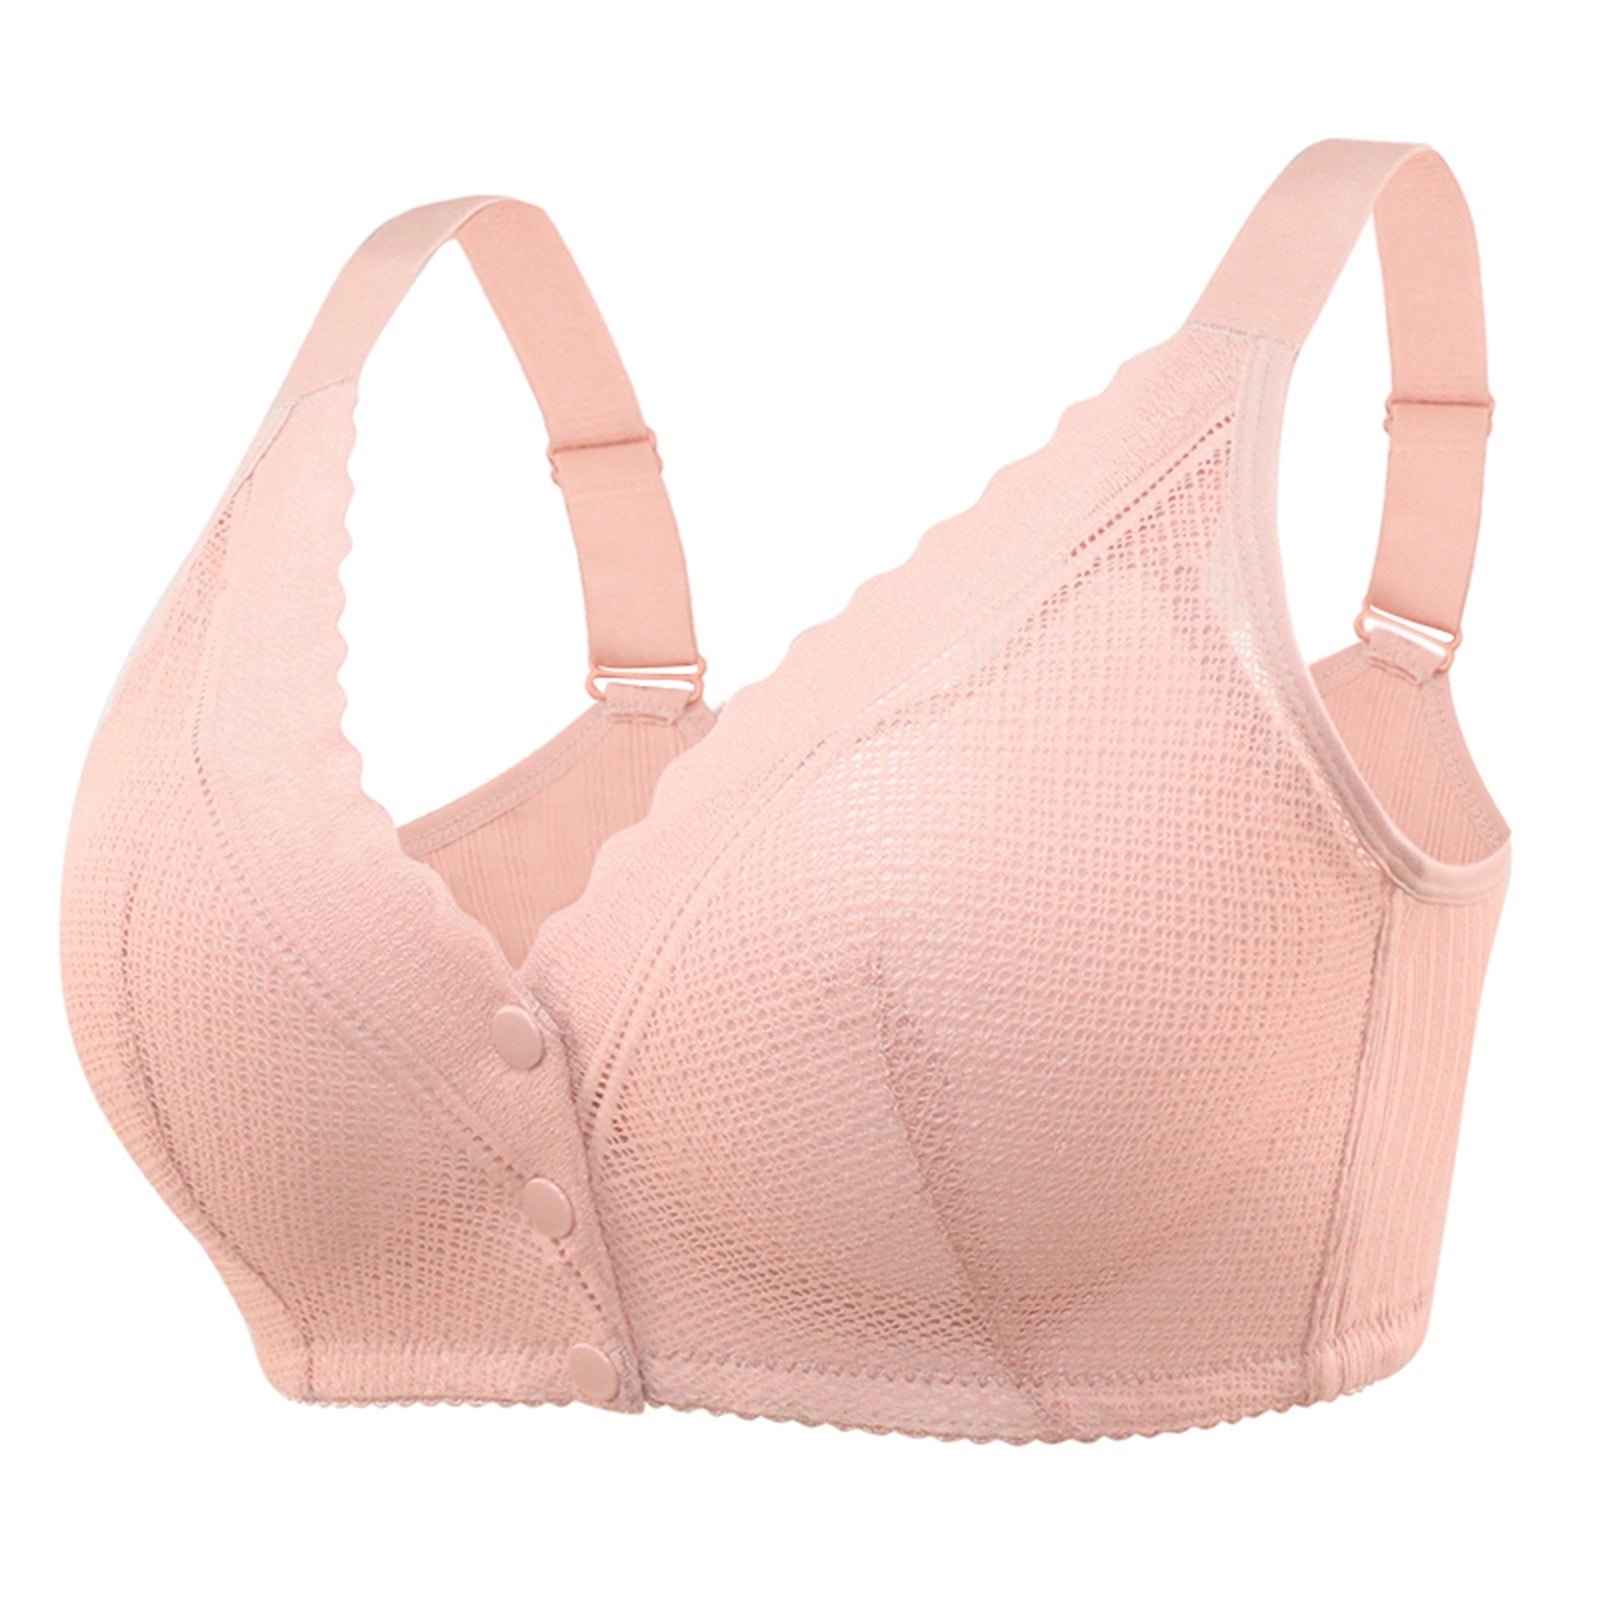 Zuwimk Bras For Women Push Up,Women's Full Cup Supportive Non-Wired Bra  Pink,36 